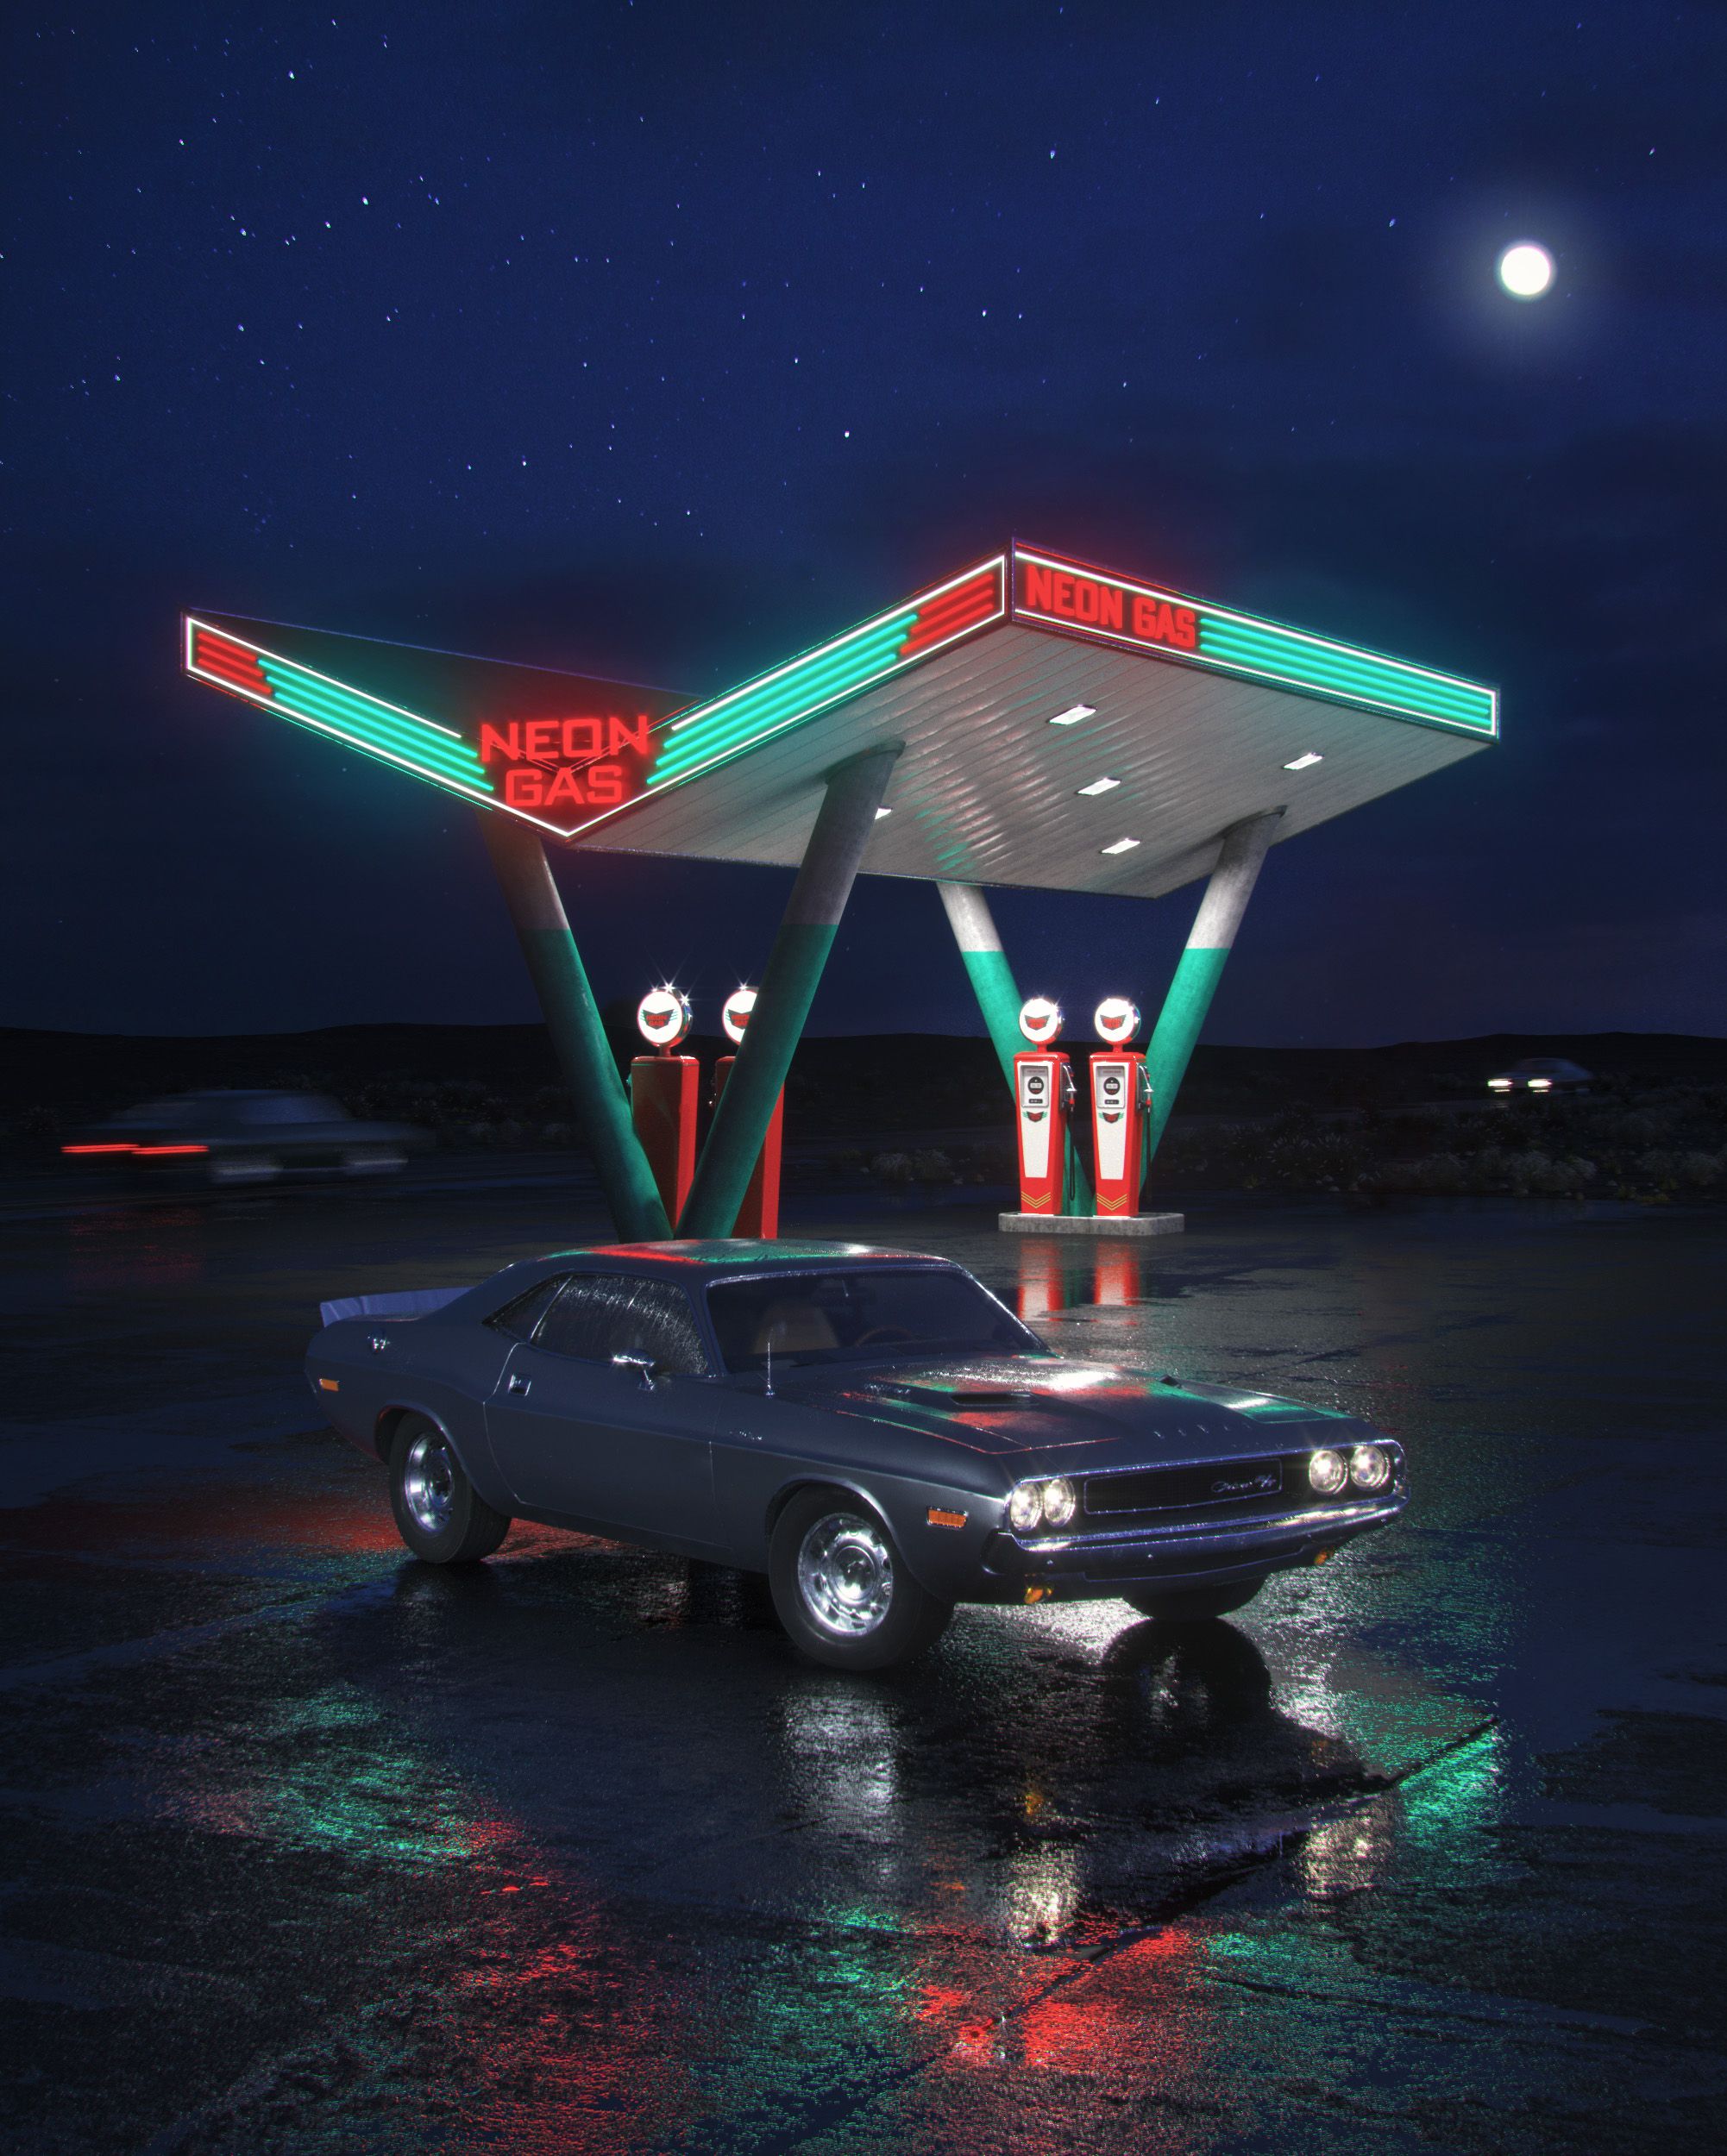 Neon Gas Station by Nikolay. Neon gas, Gas station, Old gas stations